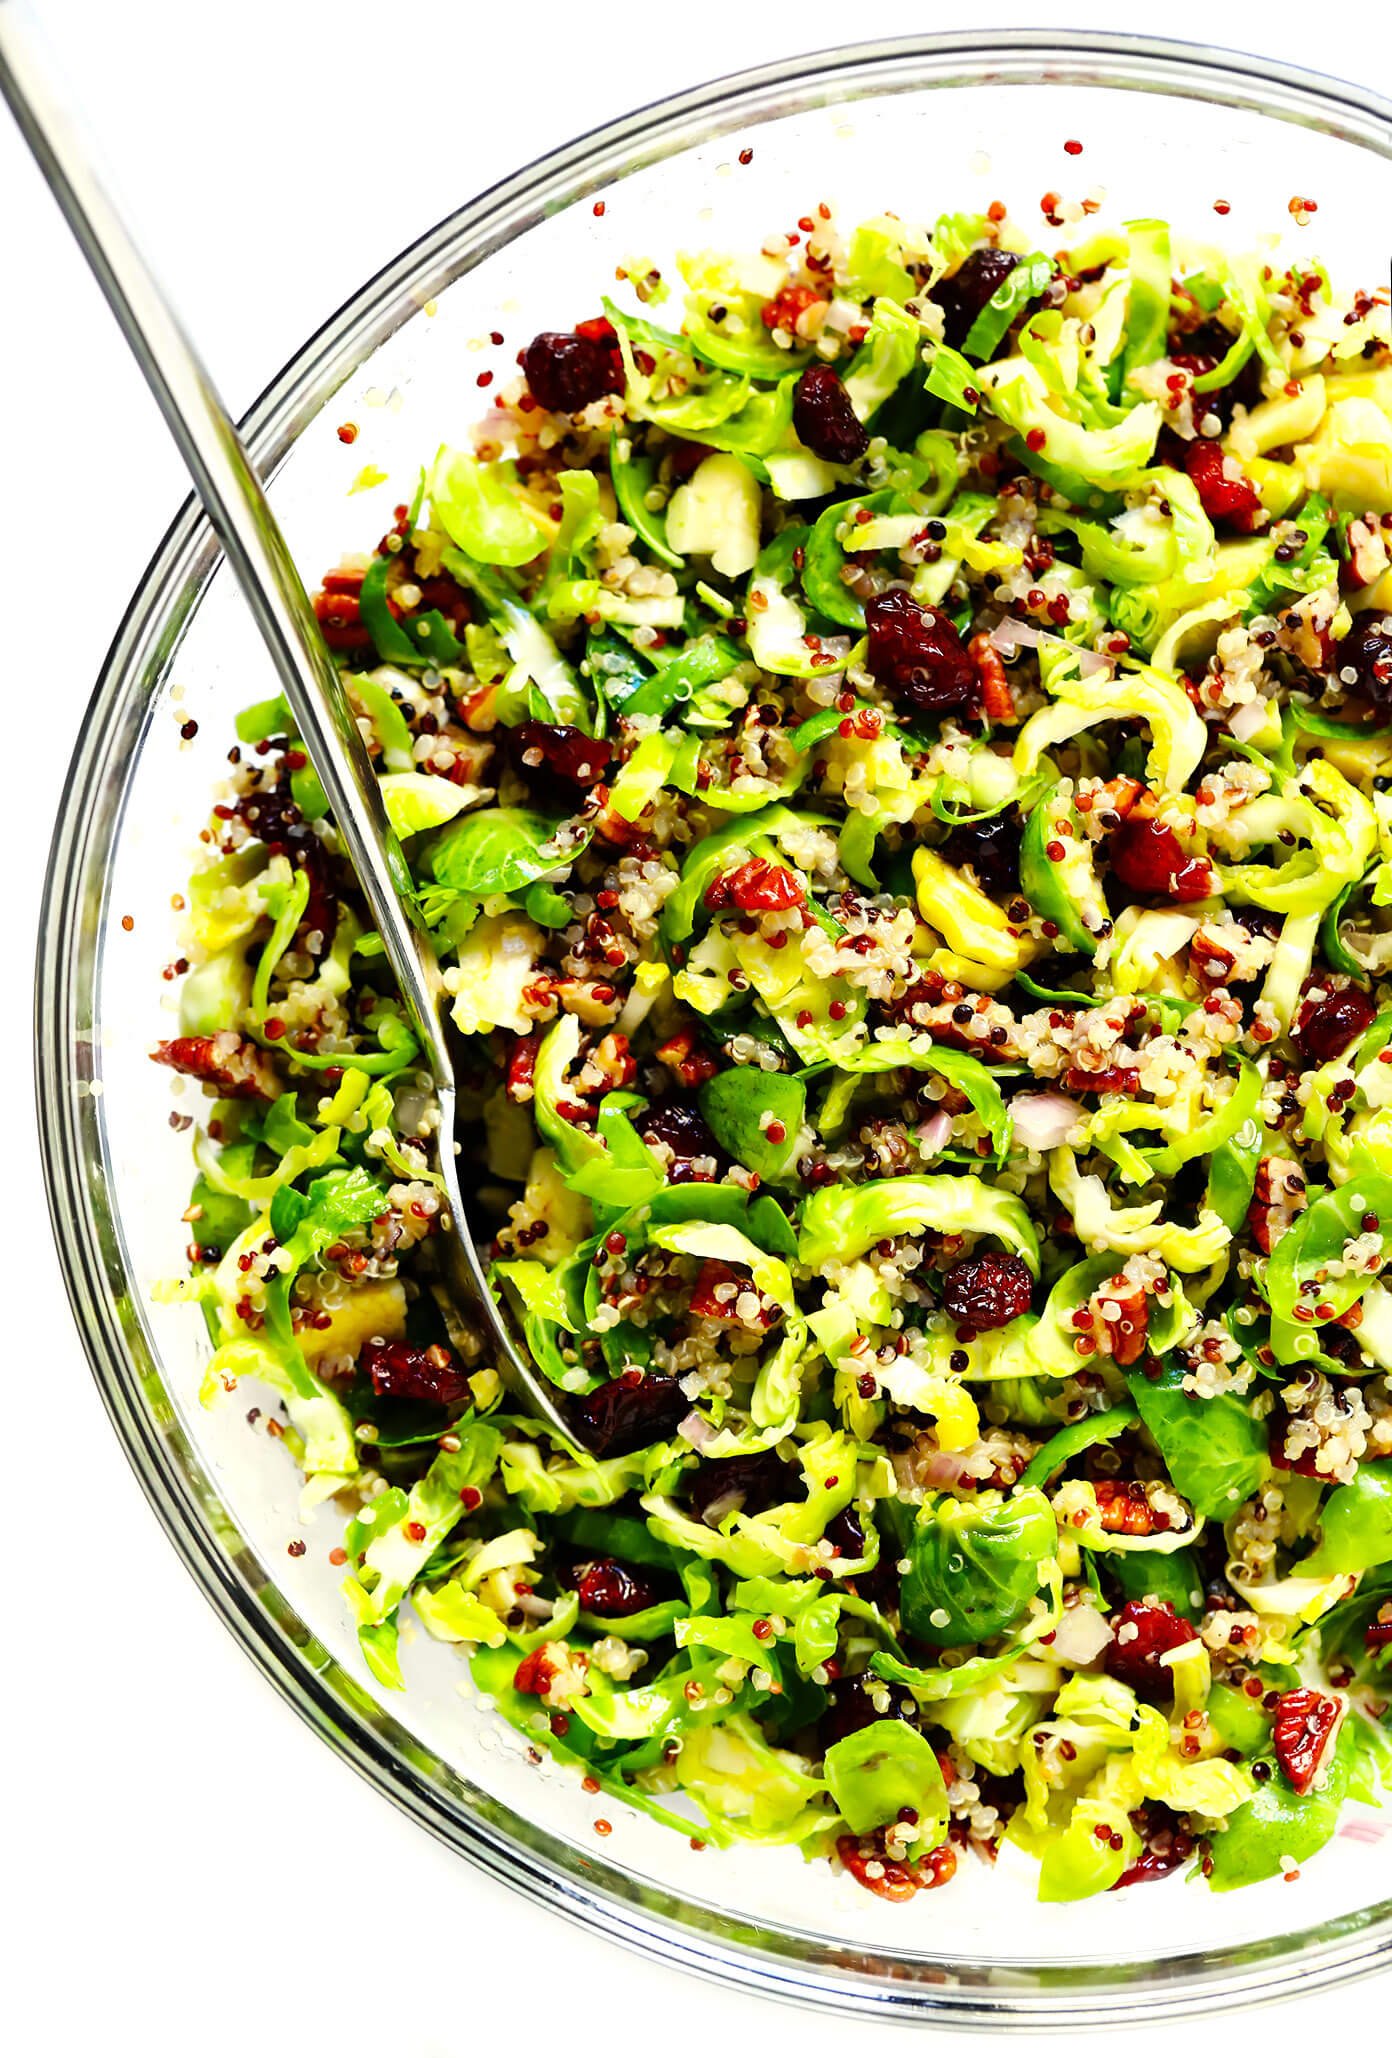 Shredded Brussels Sprouts, Cranberry and Quinoa Salad Recipe